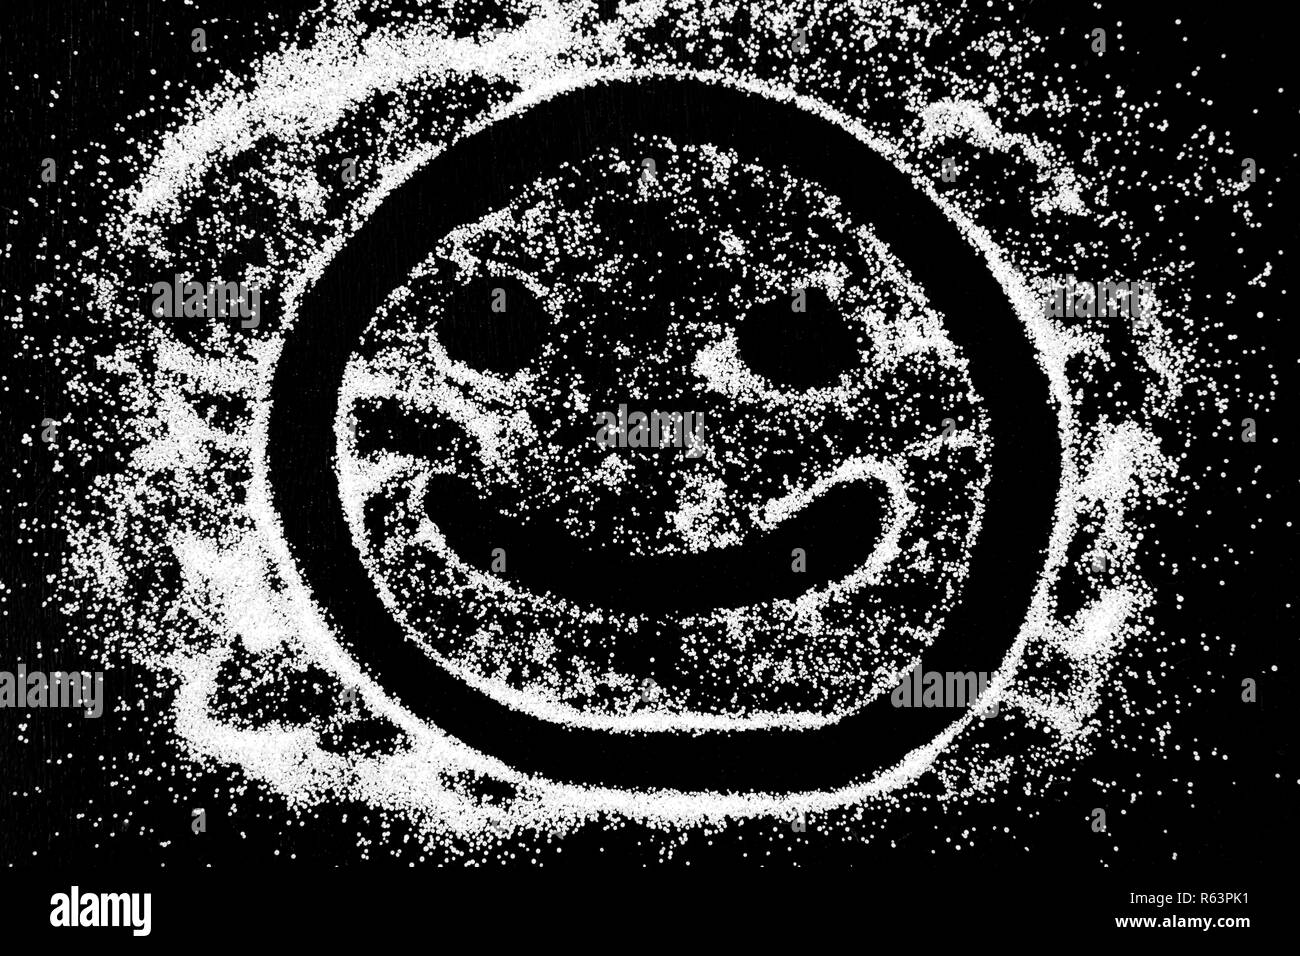 Symbol happy smile emoticon drawing by finger on white snow salt powder on black background. Concept with place for text. Copy space. Stock Photo